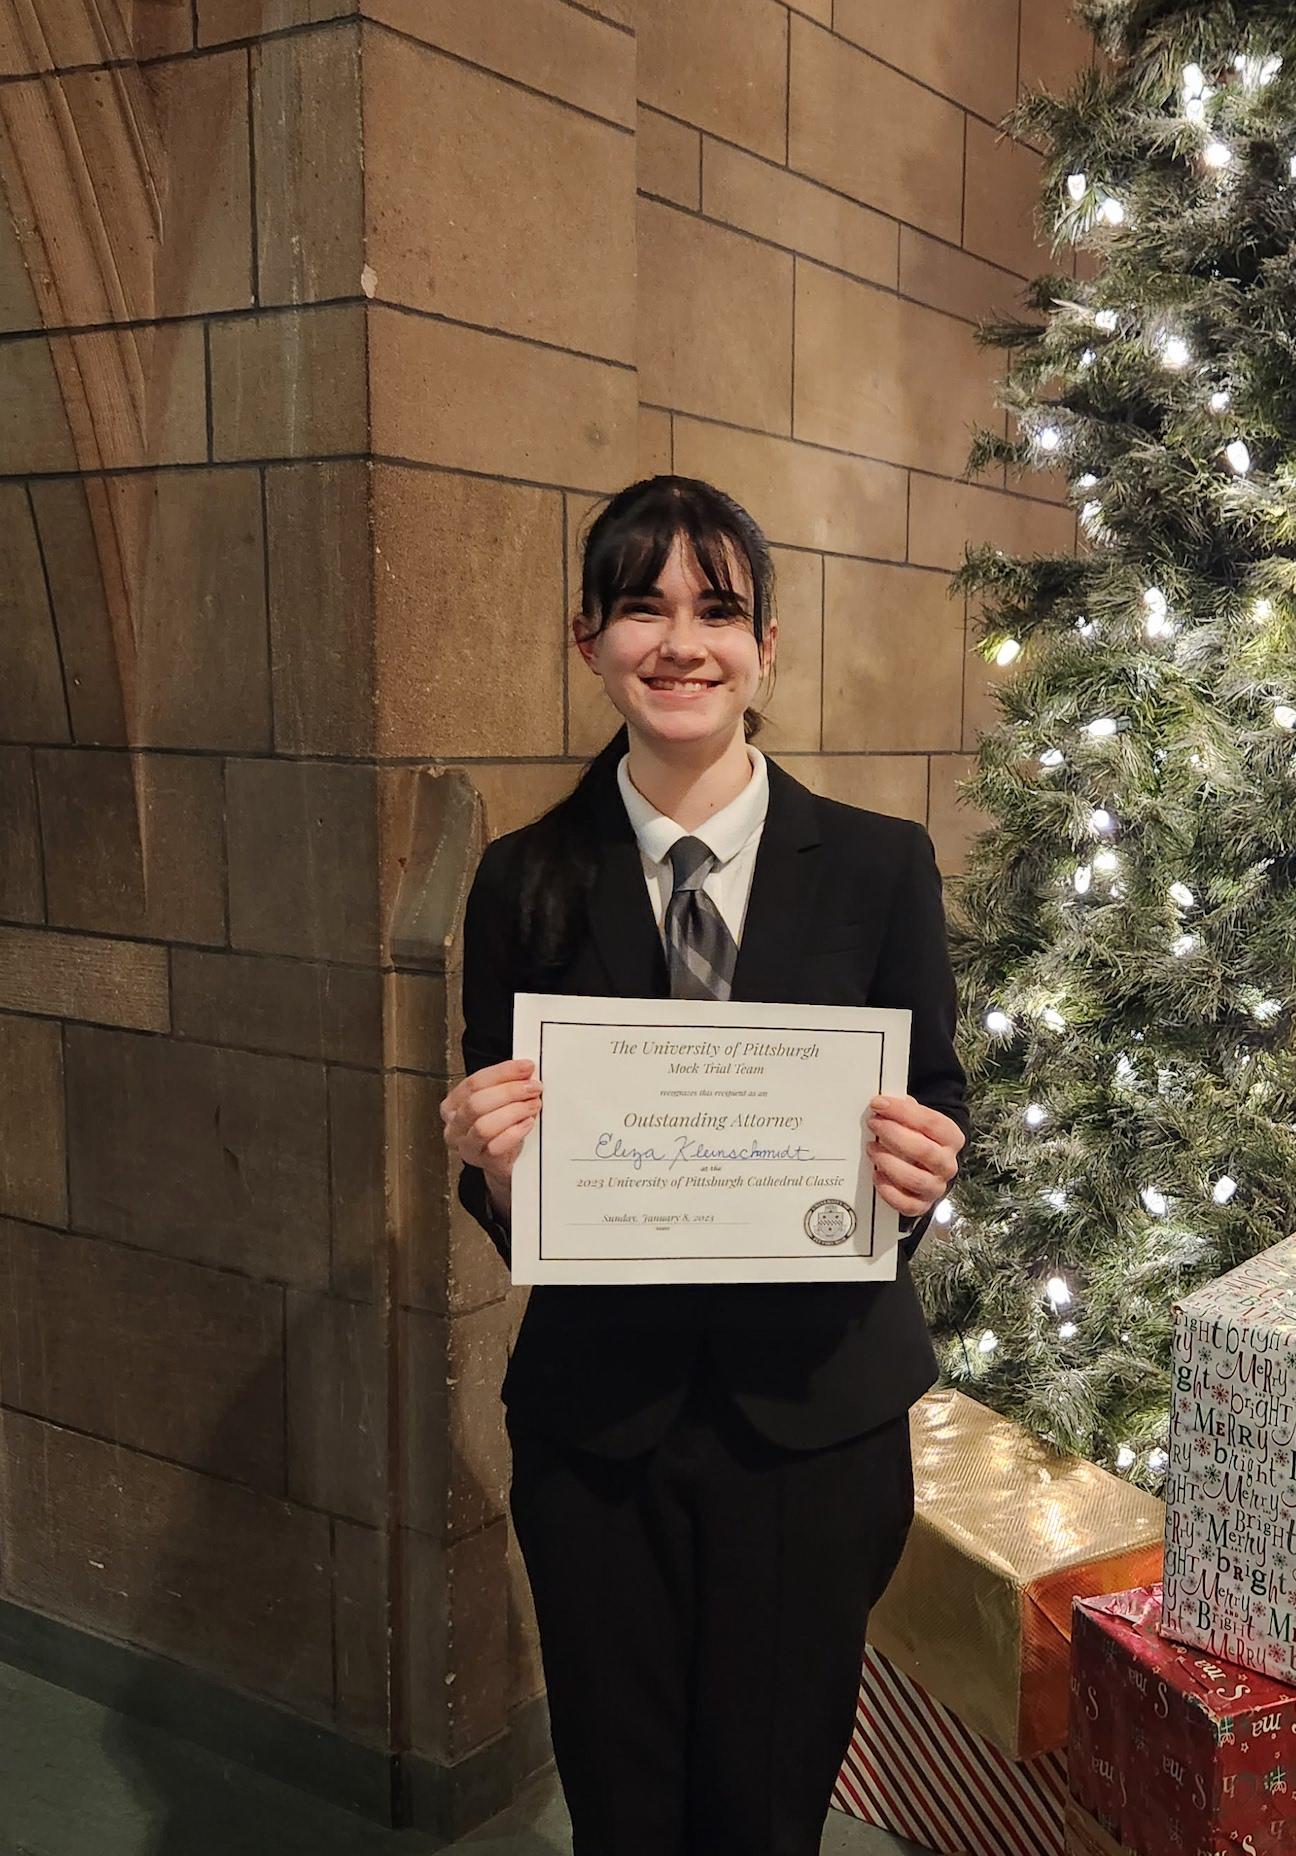 Eliza Kleinschmidt was recognized as an Outstanding Attorney